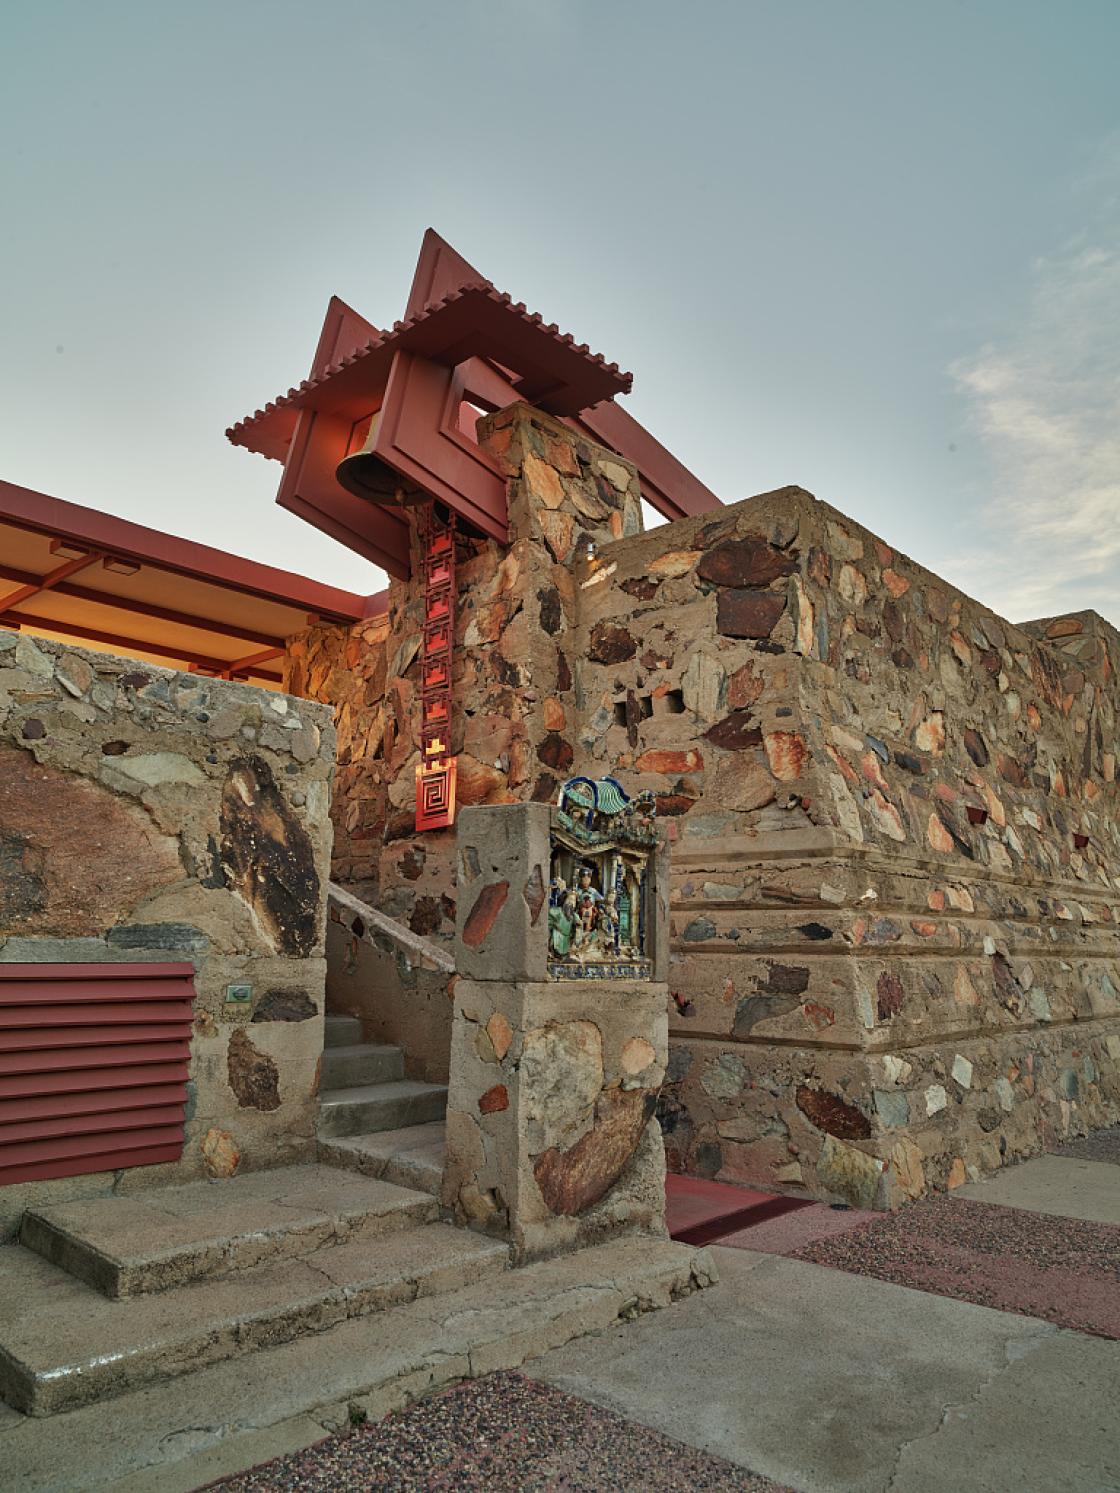 Photograph of the exterior of the Water tower at Taliesin West